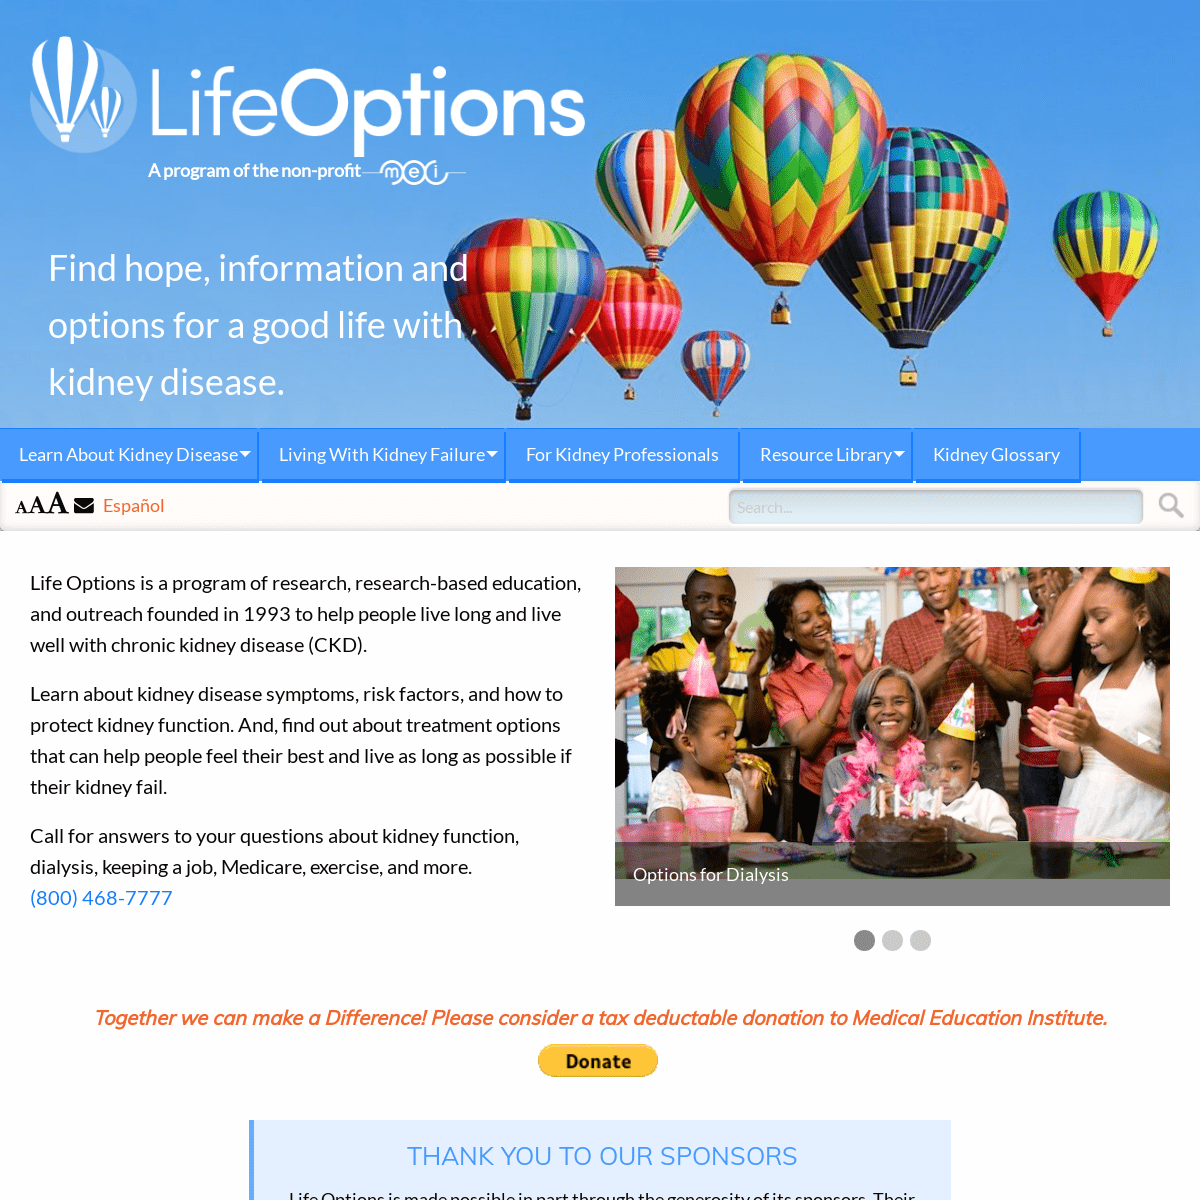 A complete backup of lifeoptions.org